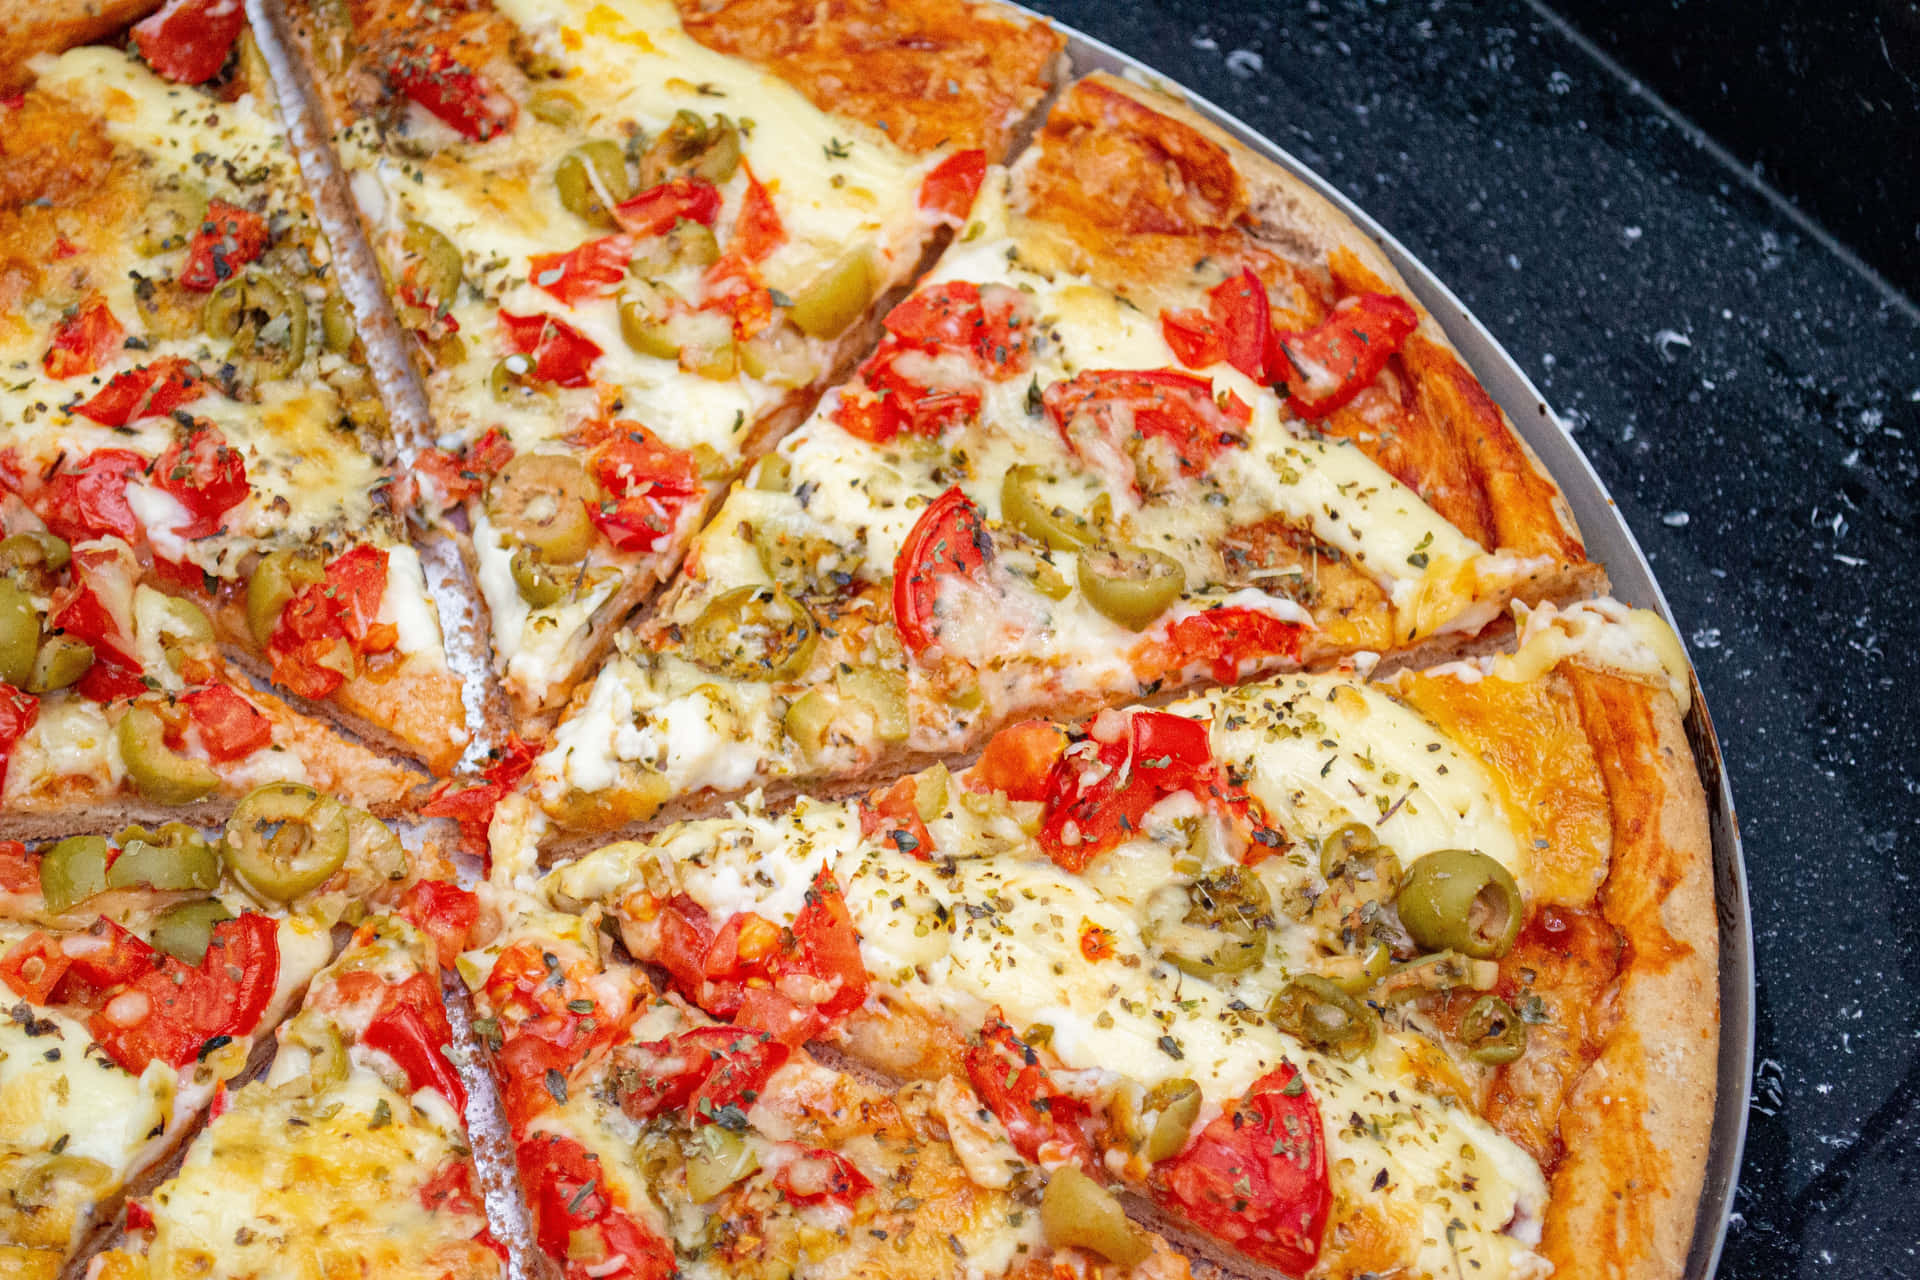 Enjoy delicious handcrafted Pizza Hut dishes